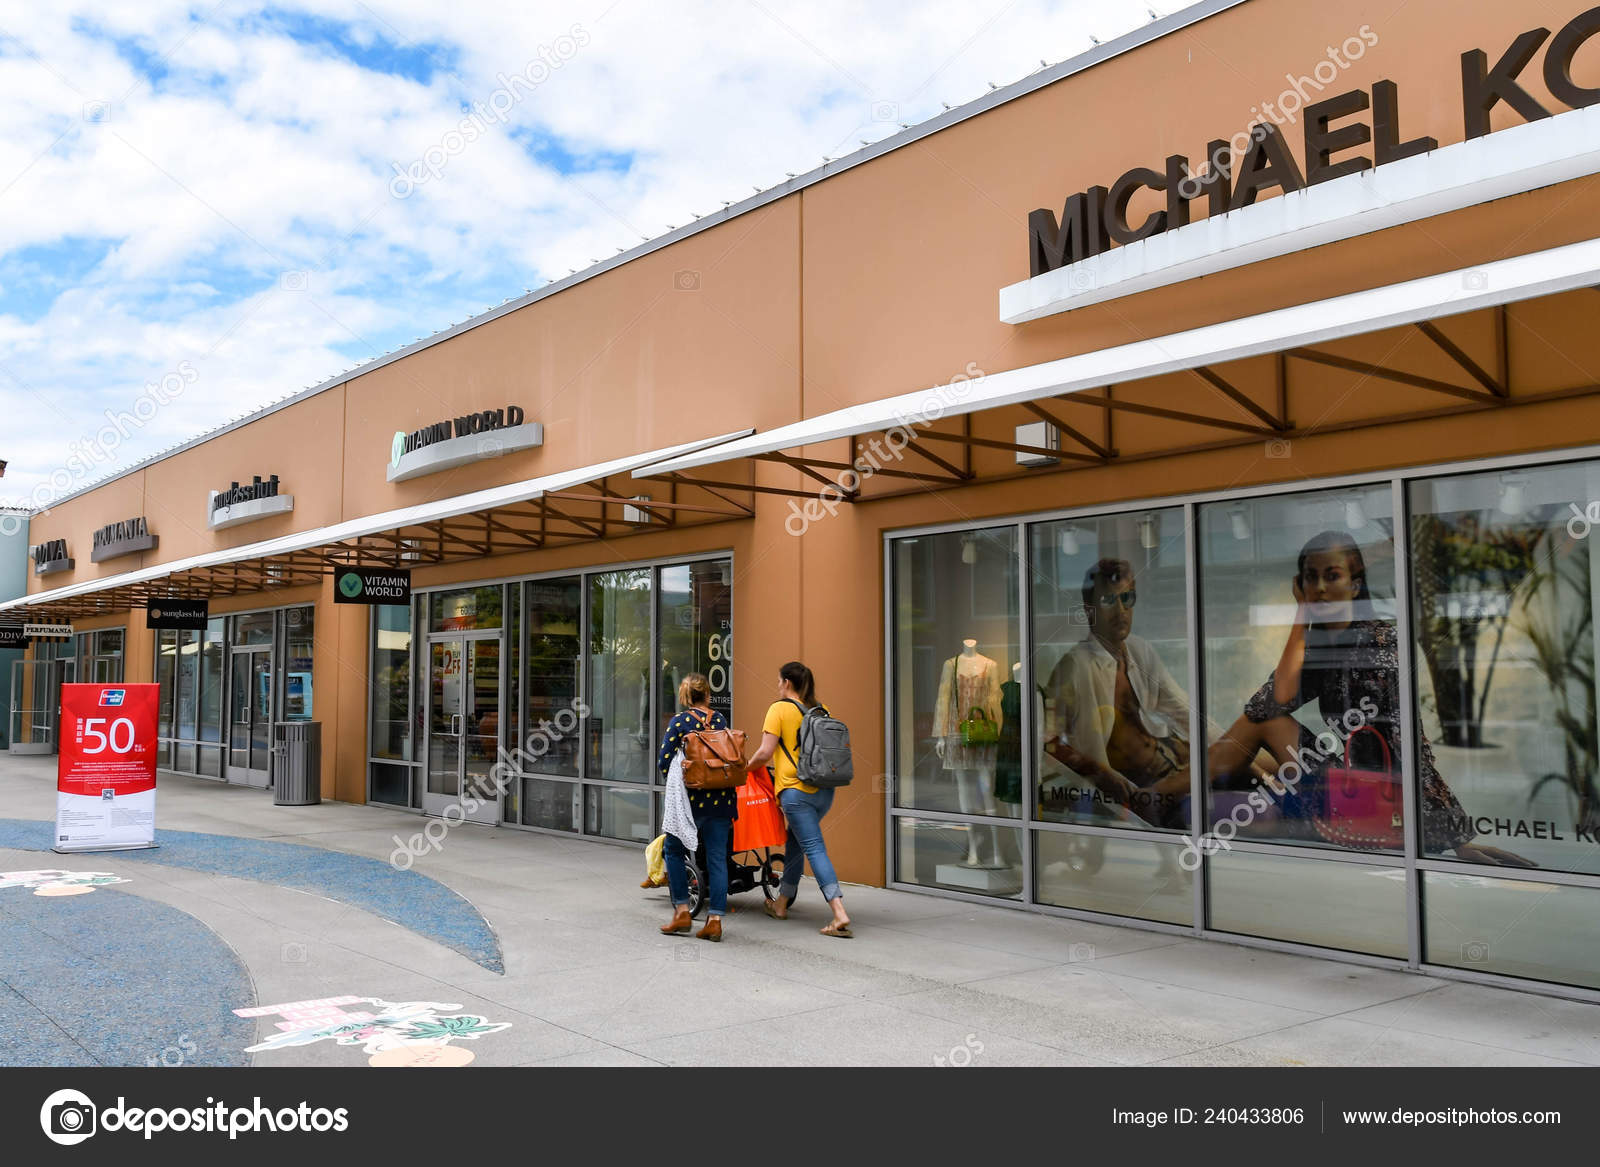 michael kors tulalip outlet